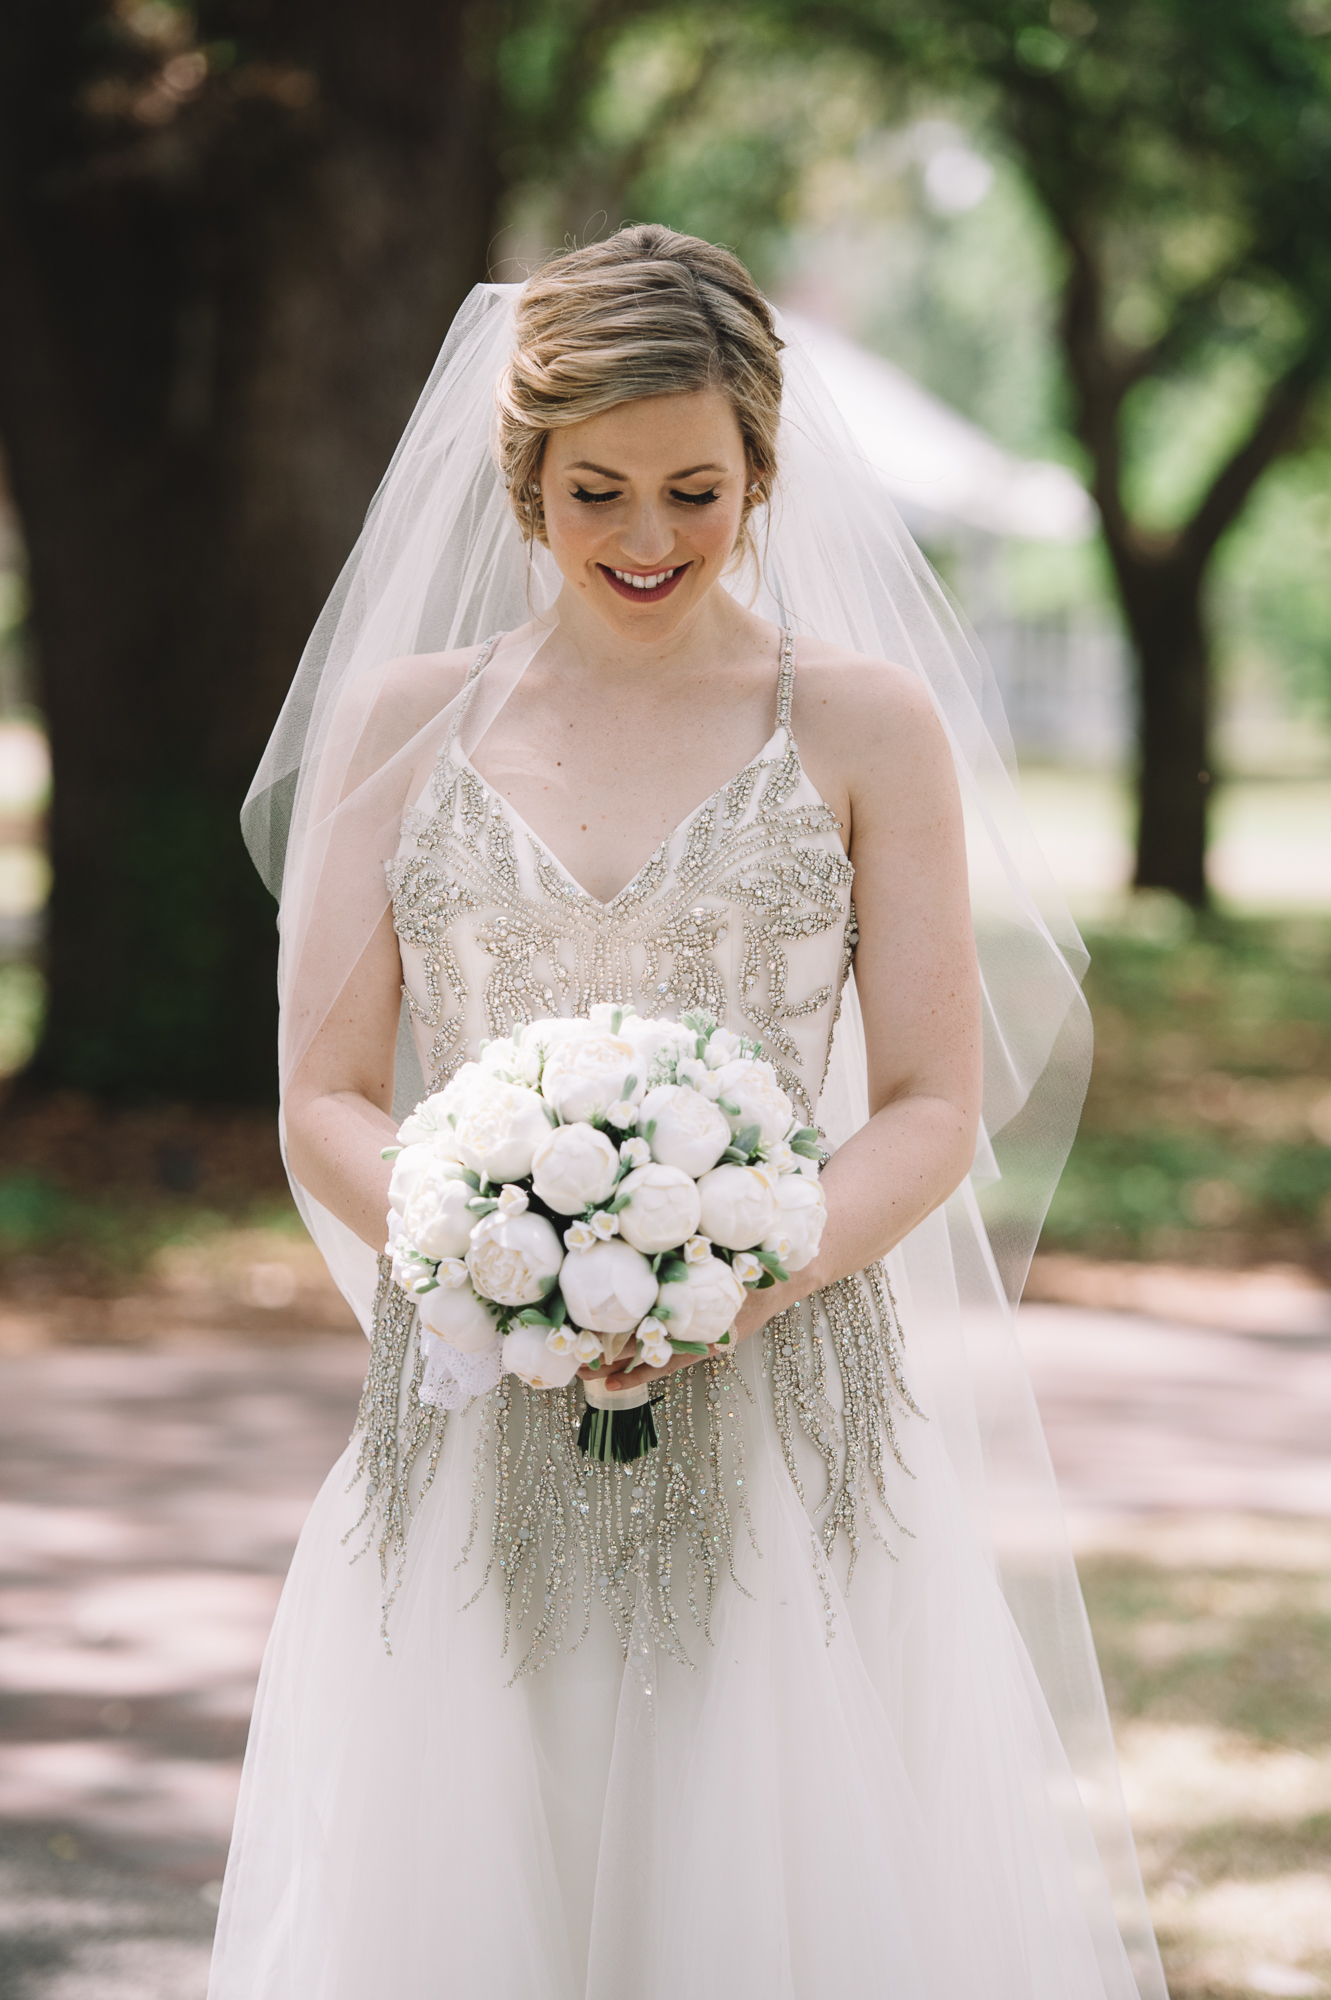 Bride with White Peony Bouquet